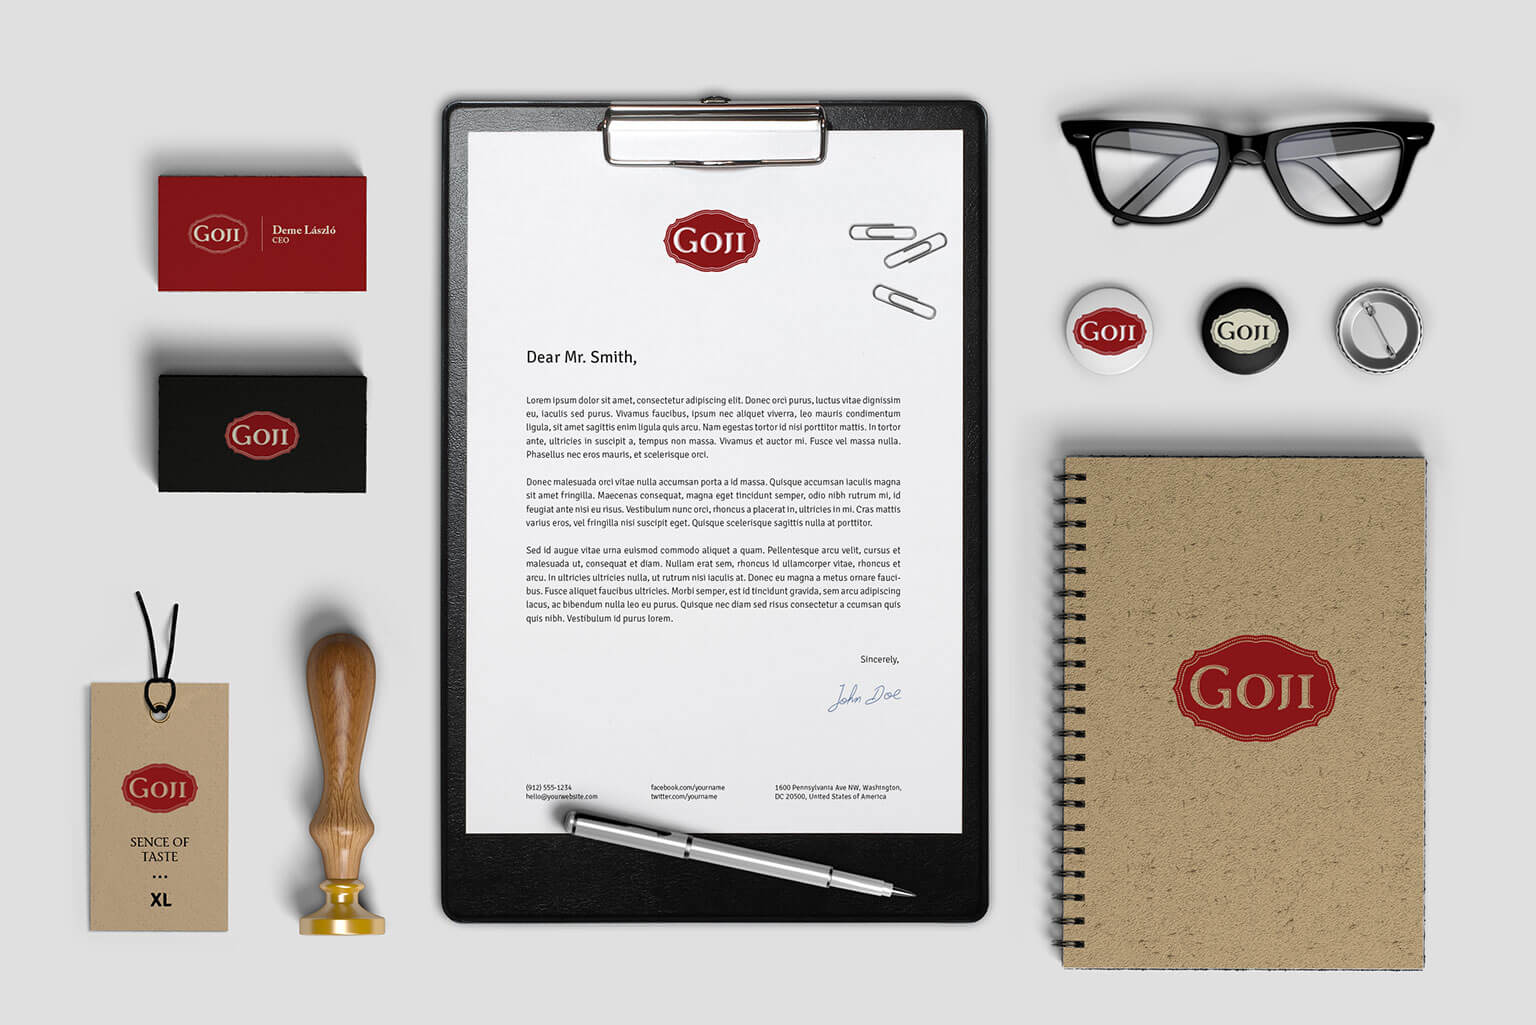 Goji packaging design, product id, logo, stationery, for a goji berry brand. The overall style of the packaging has an elegant, classy and naturalistic style.